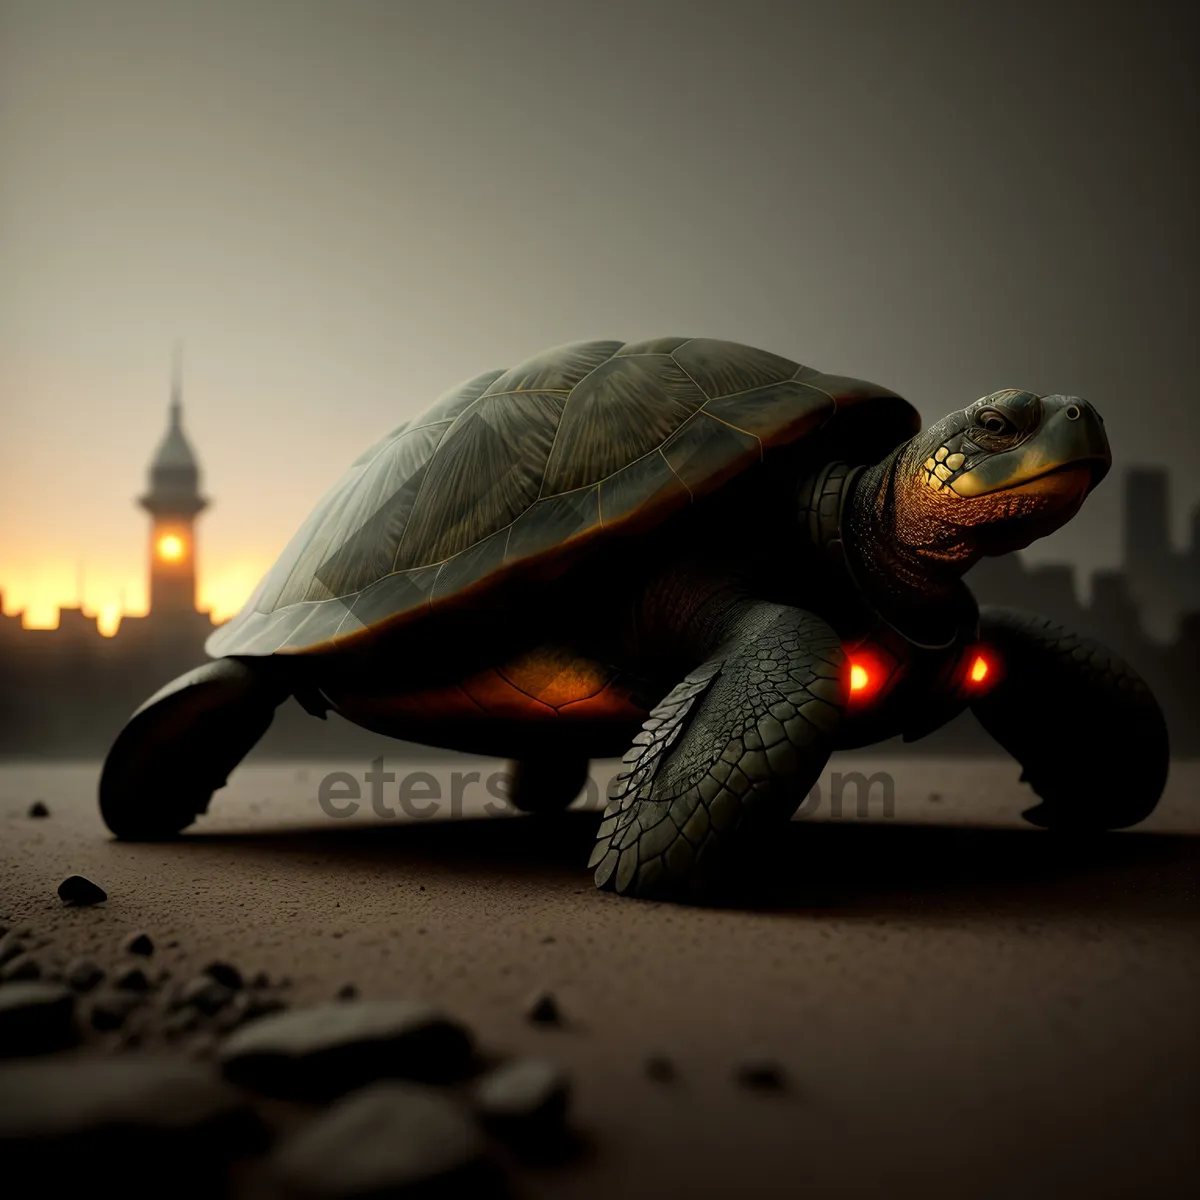 Picture of Terrapin: A Slow, Shell-covered Aquatic Creature of Protection